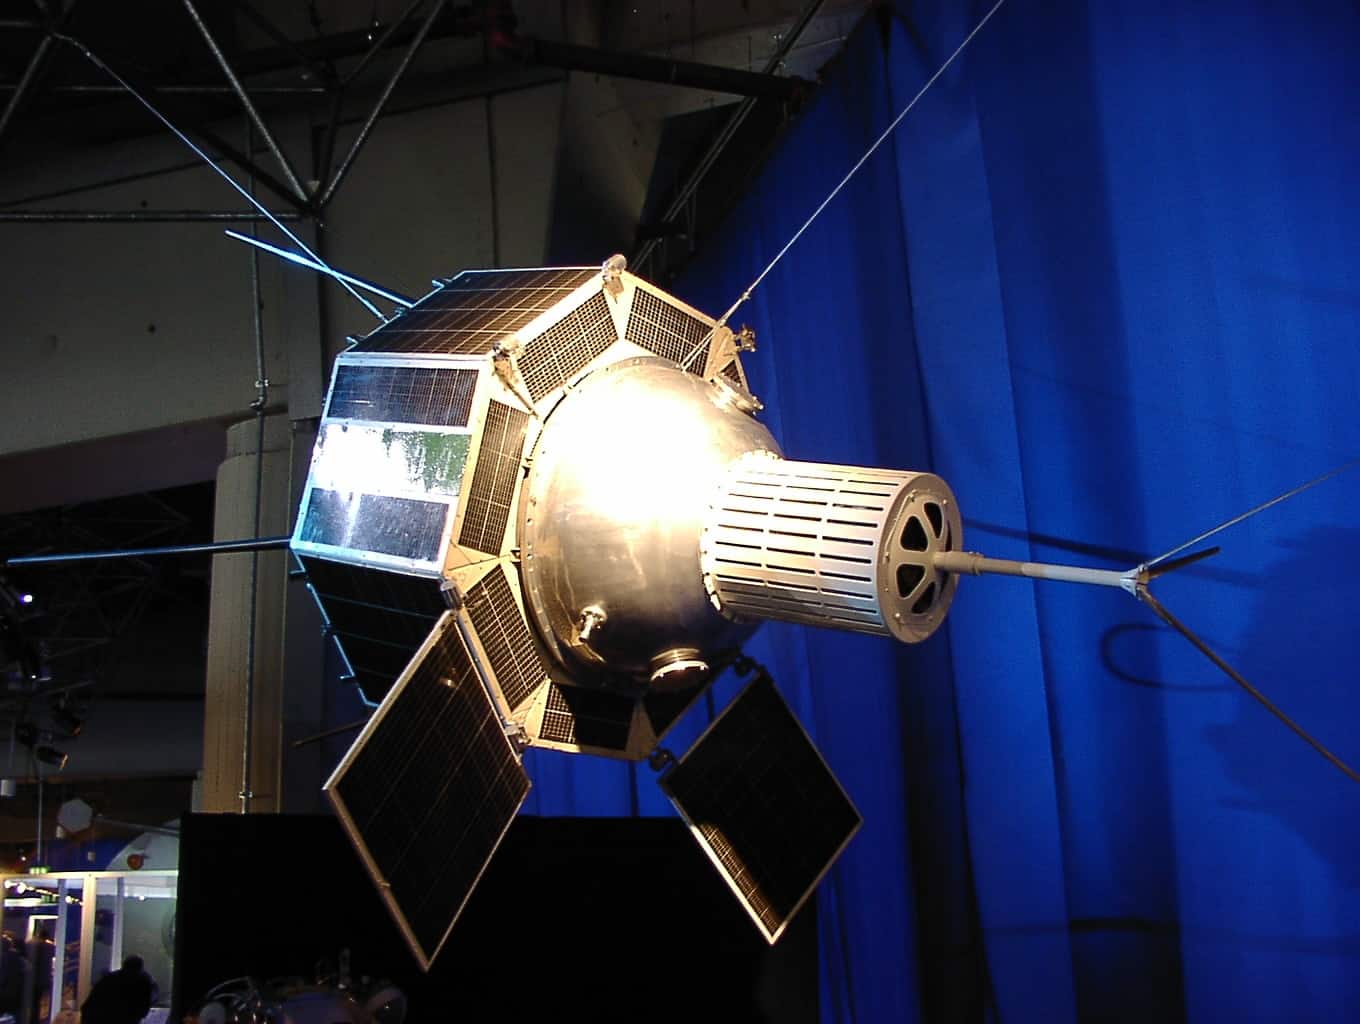 Russian/soviet research satellite. Photo taken at the 